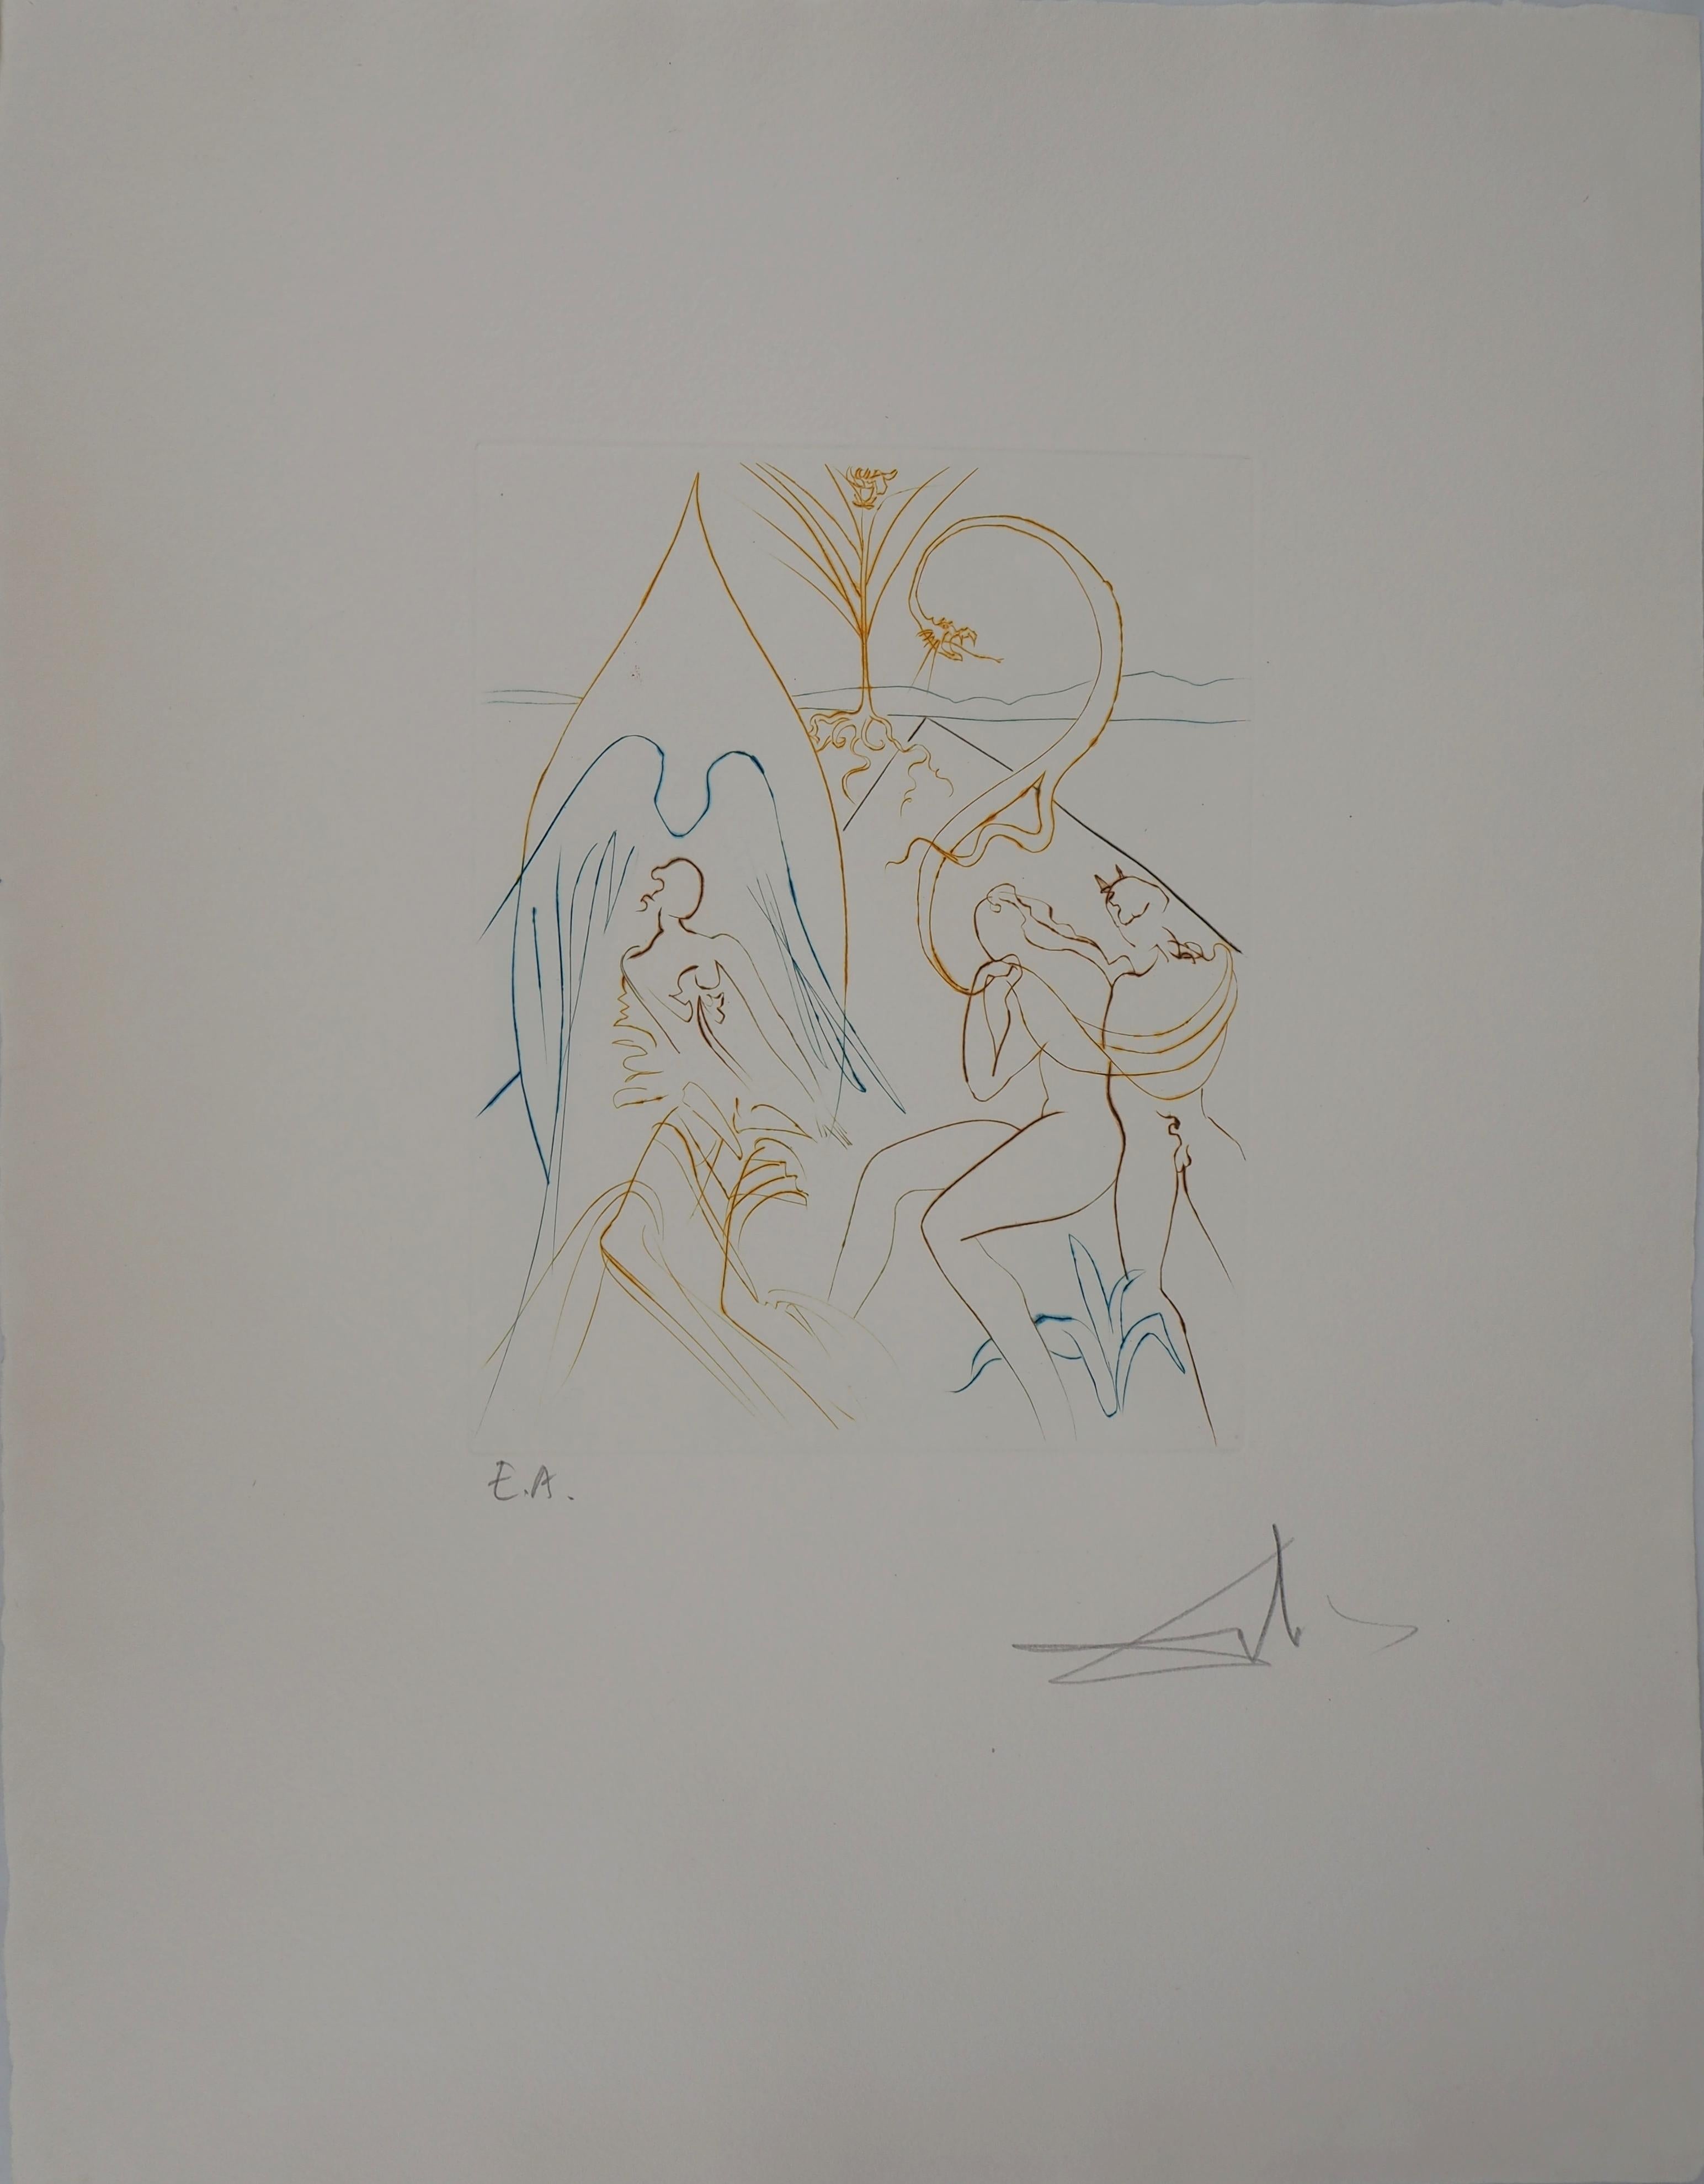 Salvador Dalí Figurative Print - Milton, Lost Paradise : The Tree of Life - Original Hand Signed Etching, 1974